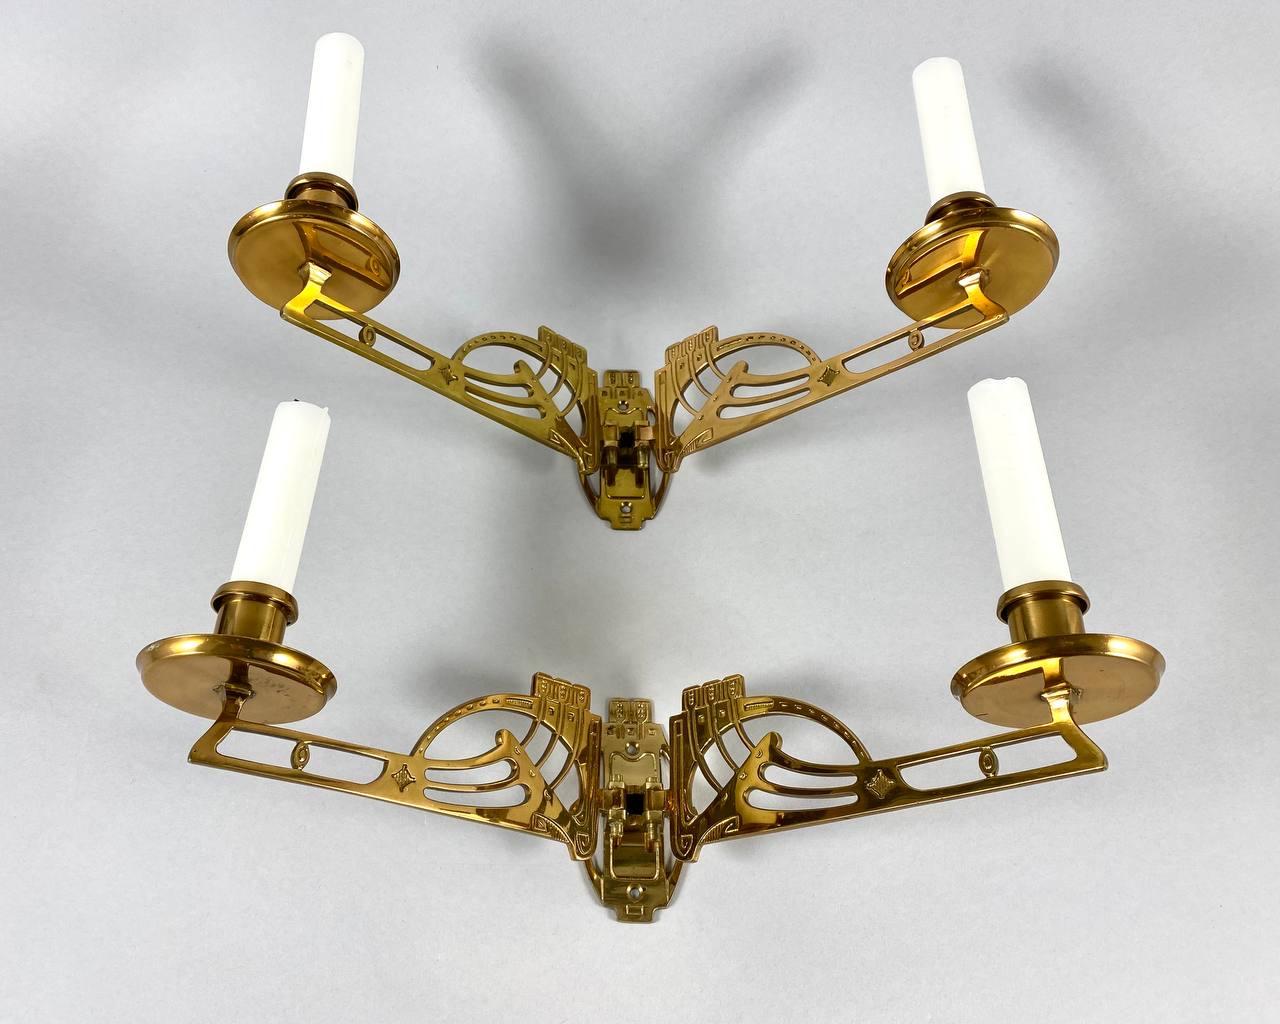 Mid-20th Century Charming Pair of Art Nouveau Style Piano Candelabra Vintage Brass Candlesticks